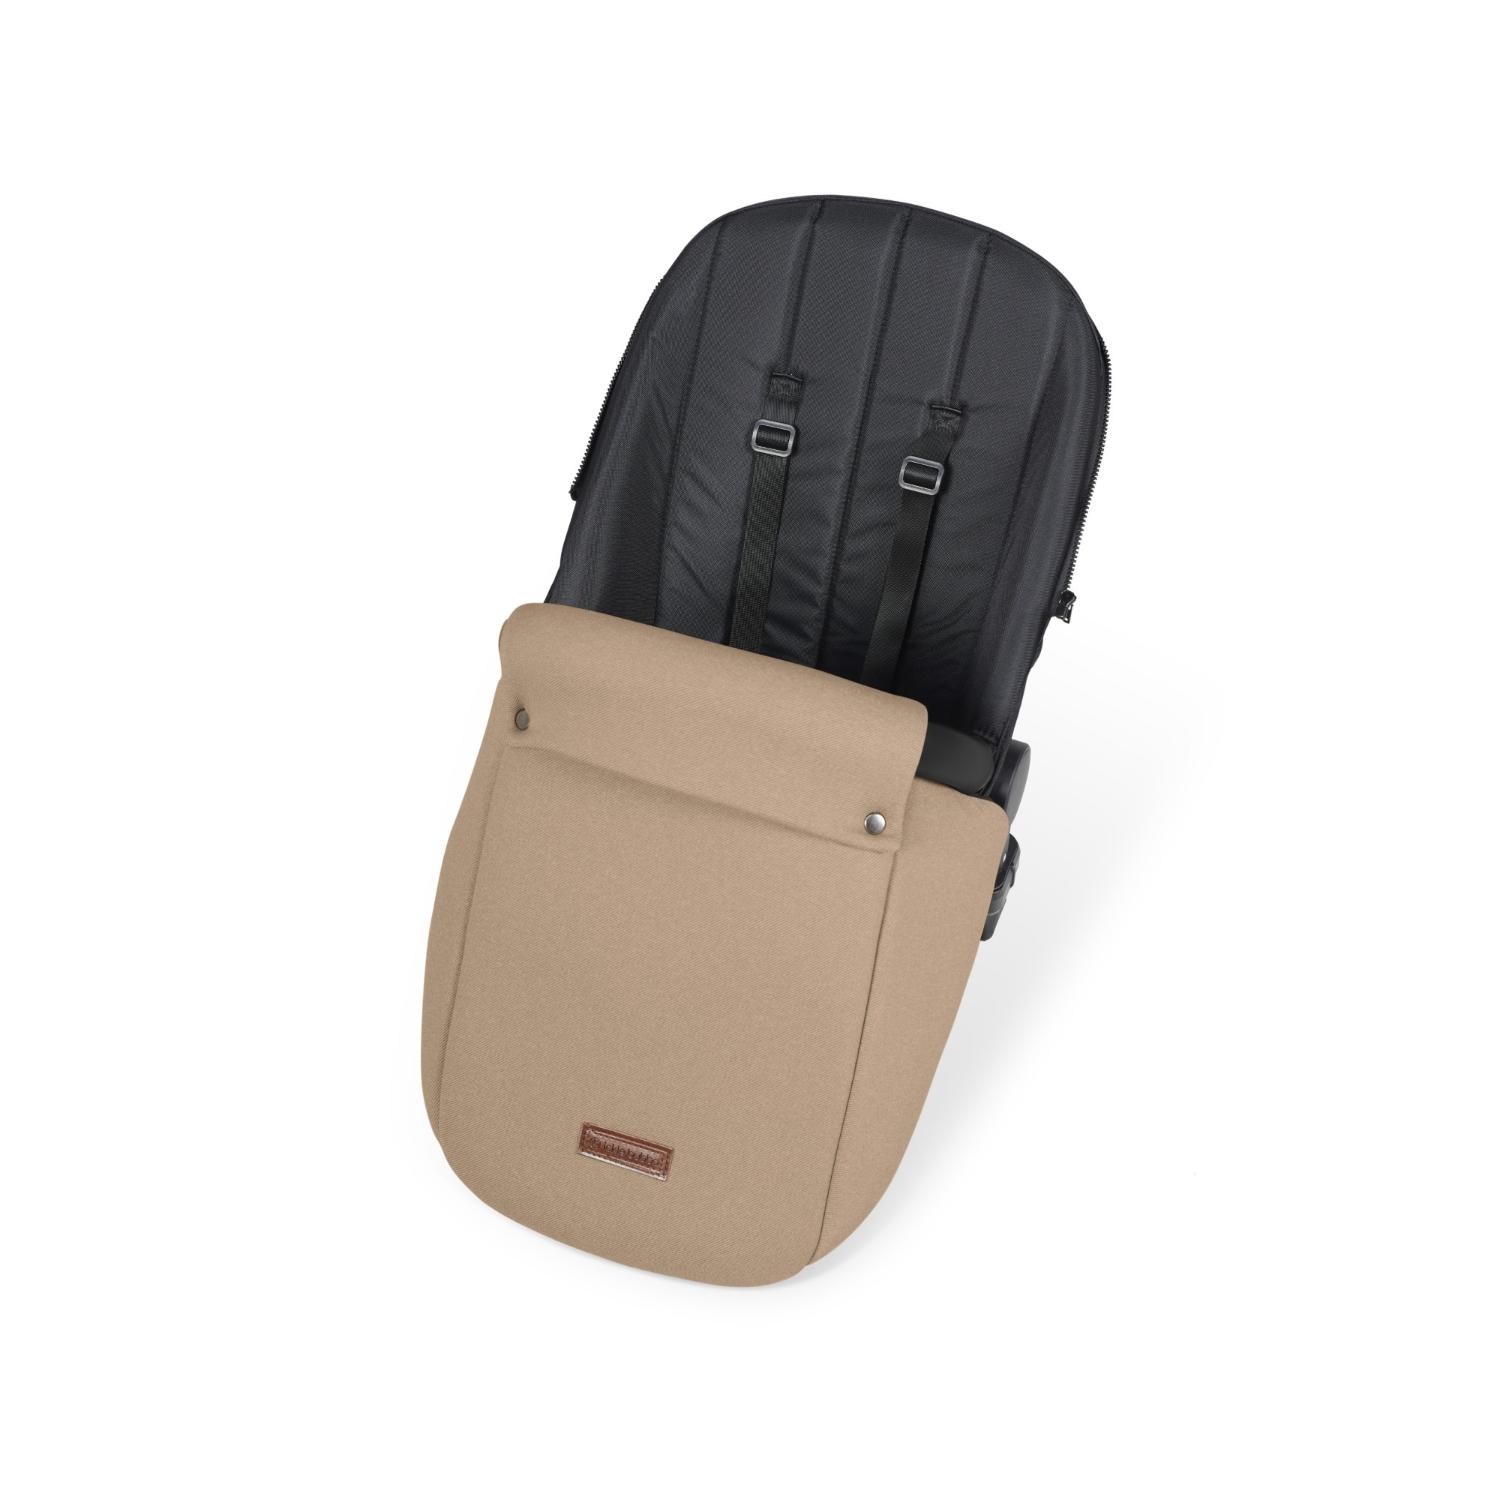 Seat unit with foot warmer included in Ickle Bubba Stomp Luxe All-in-One Travel System in Desert beige colour